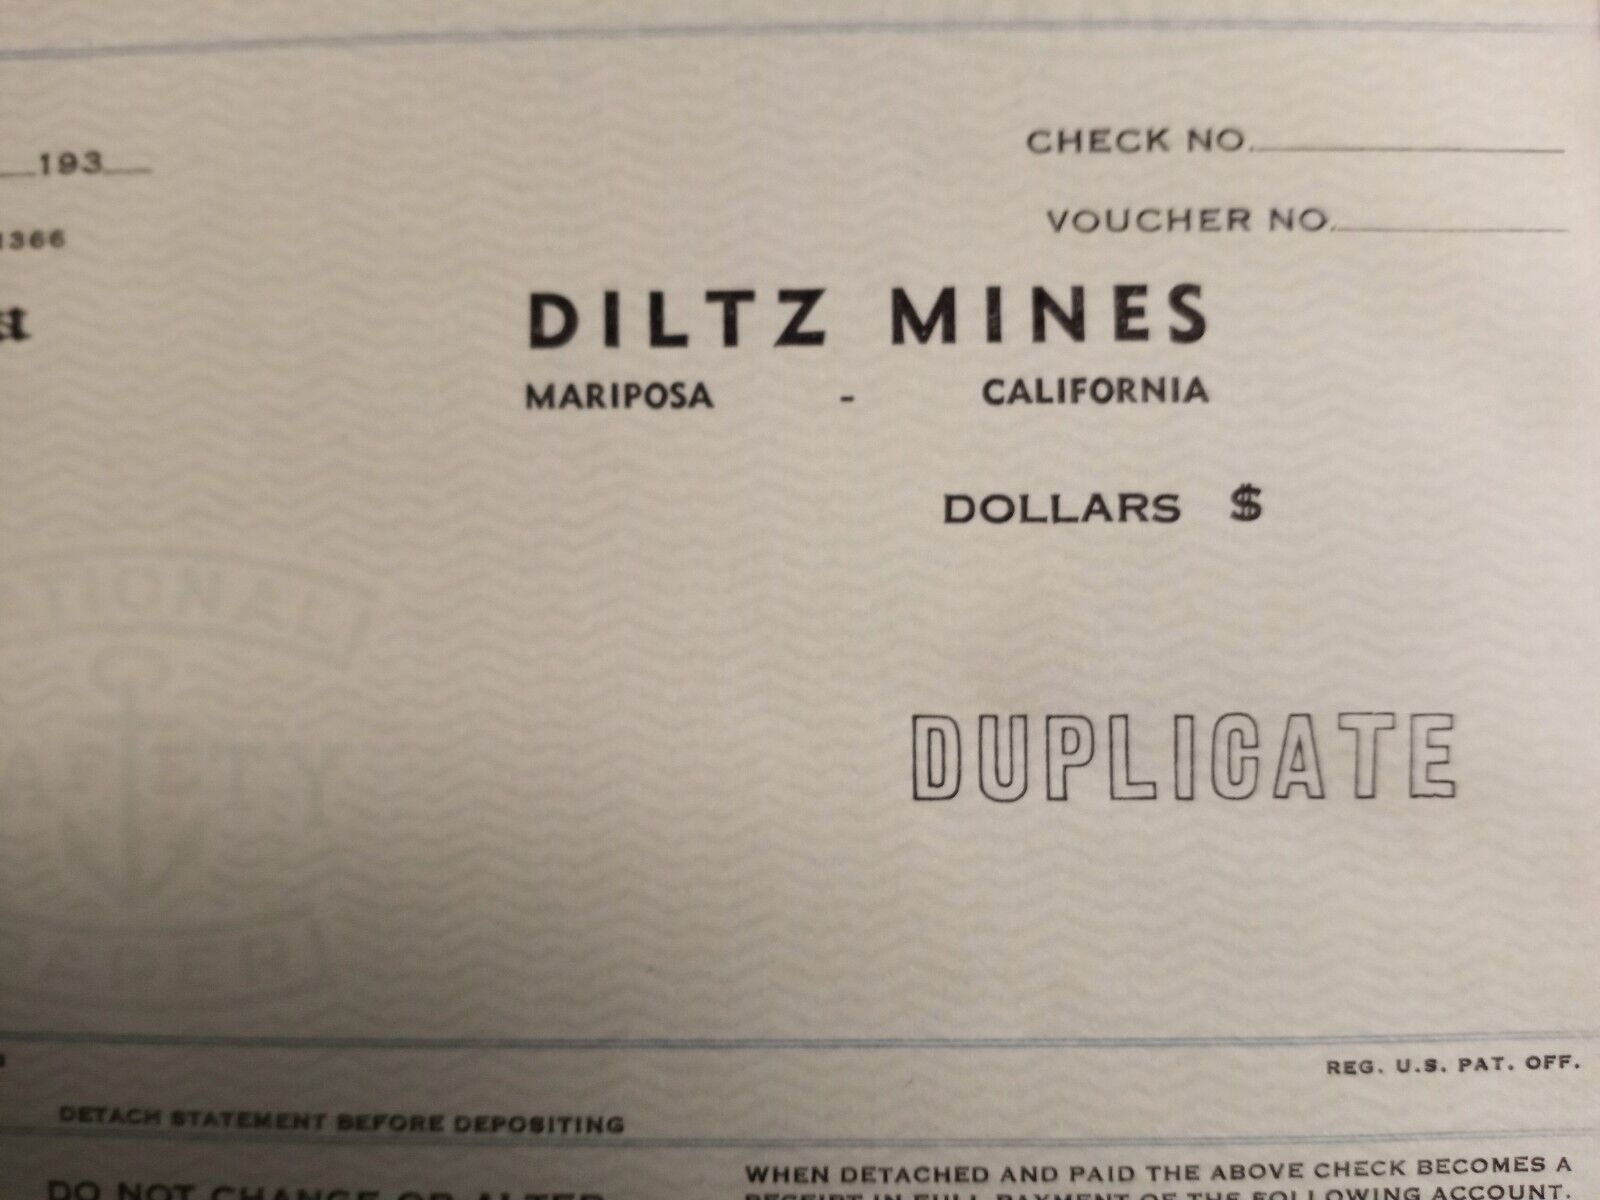 Diltz Mines Bank Of America Blank Payroll Check.